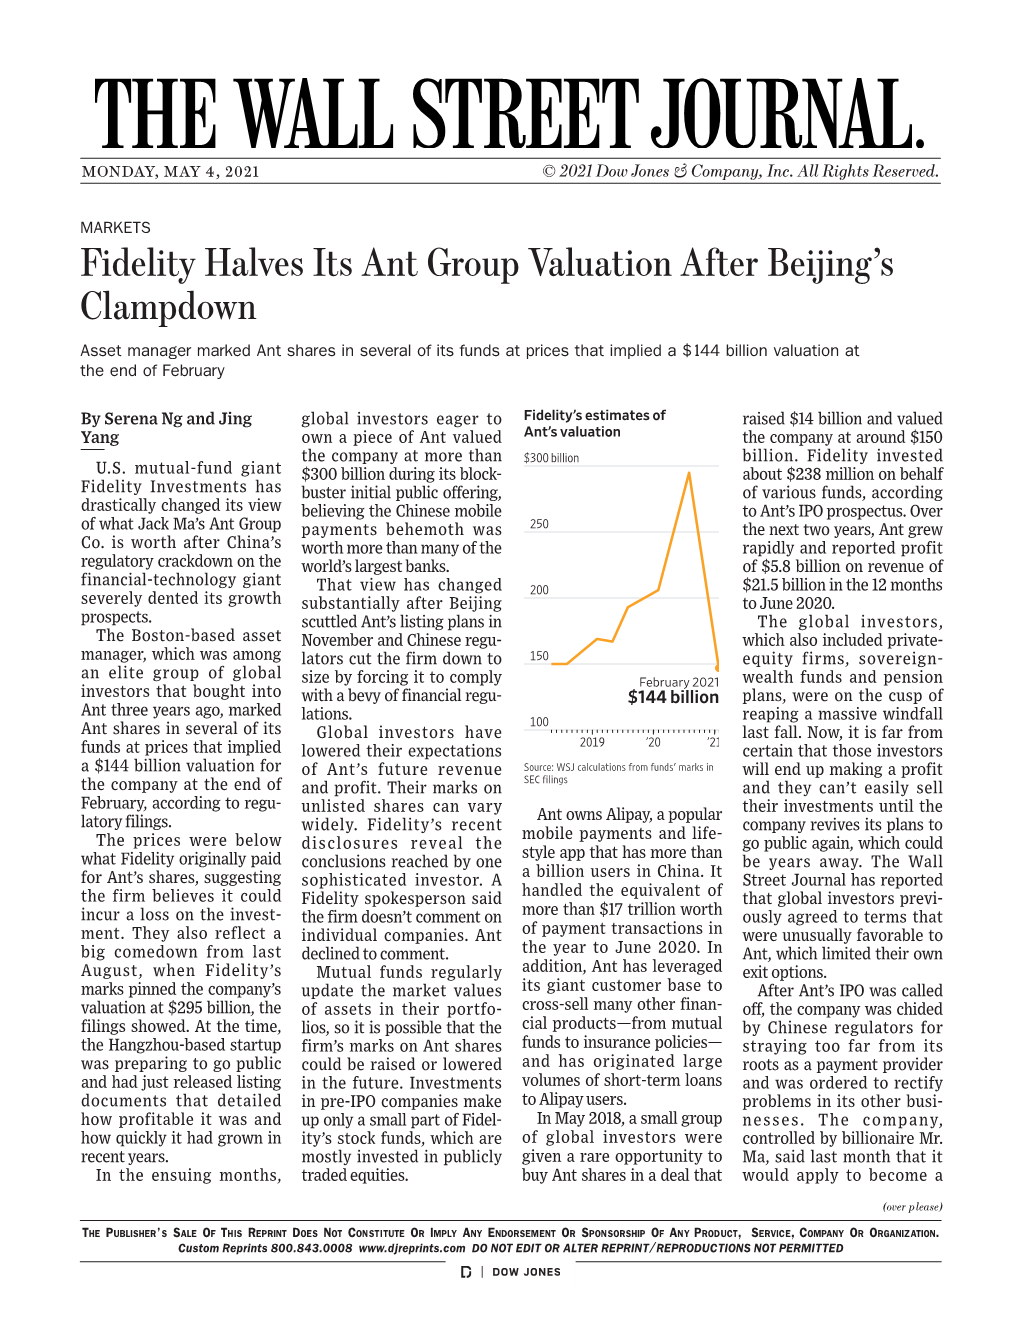 WSJ | Fidelity Halves Its Ant Group Valuation After Beijing's